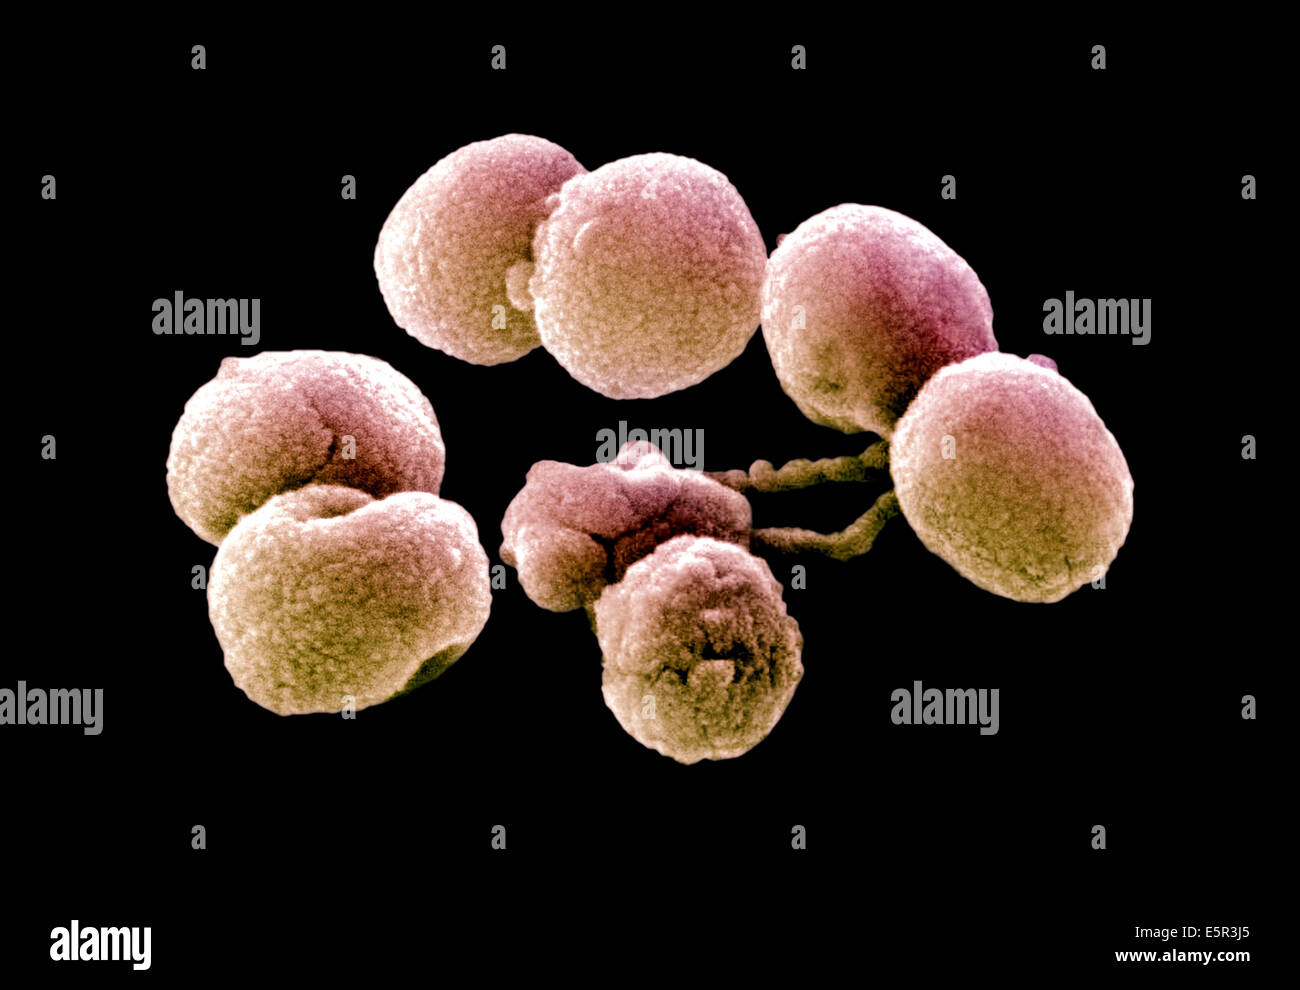 Scanning Electron Micrograph (SEM) of Streptococcus pneumoniae bacteria, This Gram-negative bacterium is a leading cause of Stock Photo